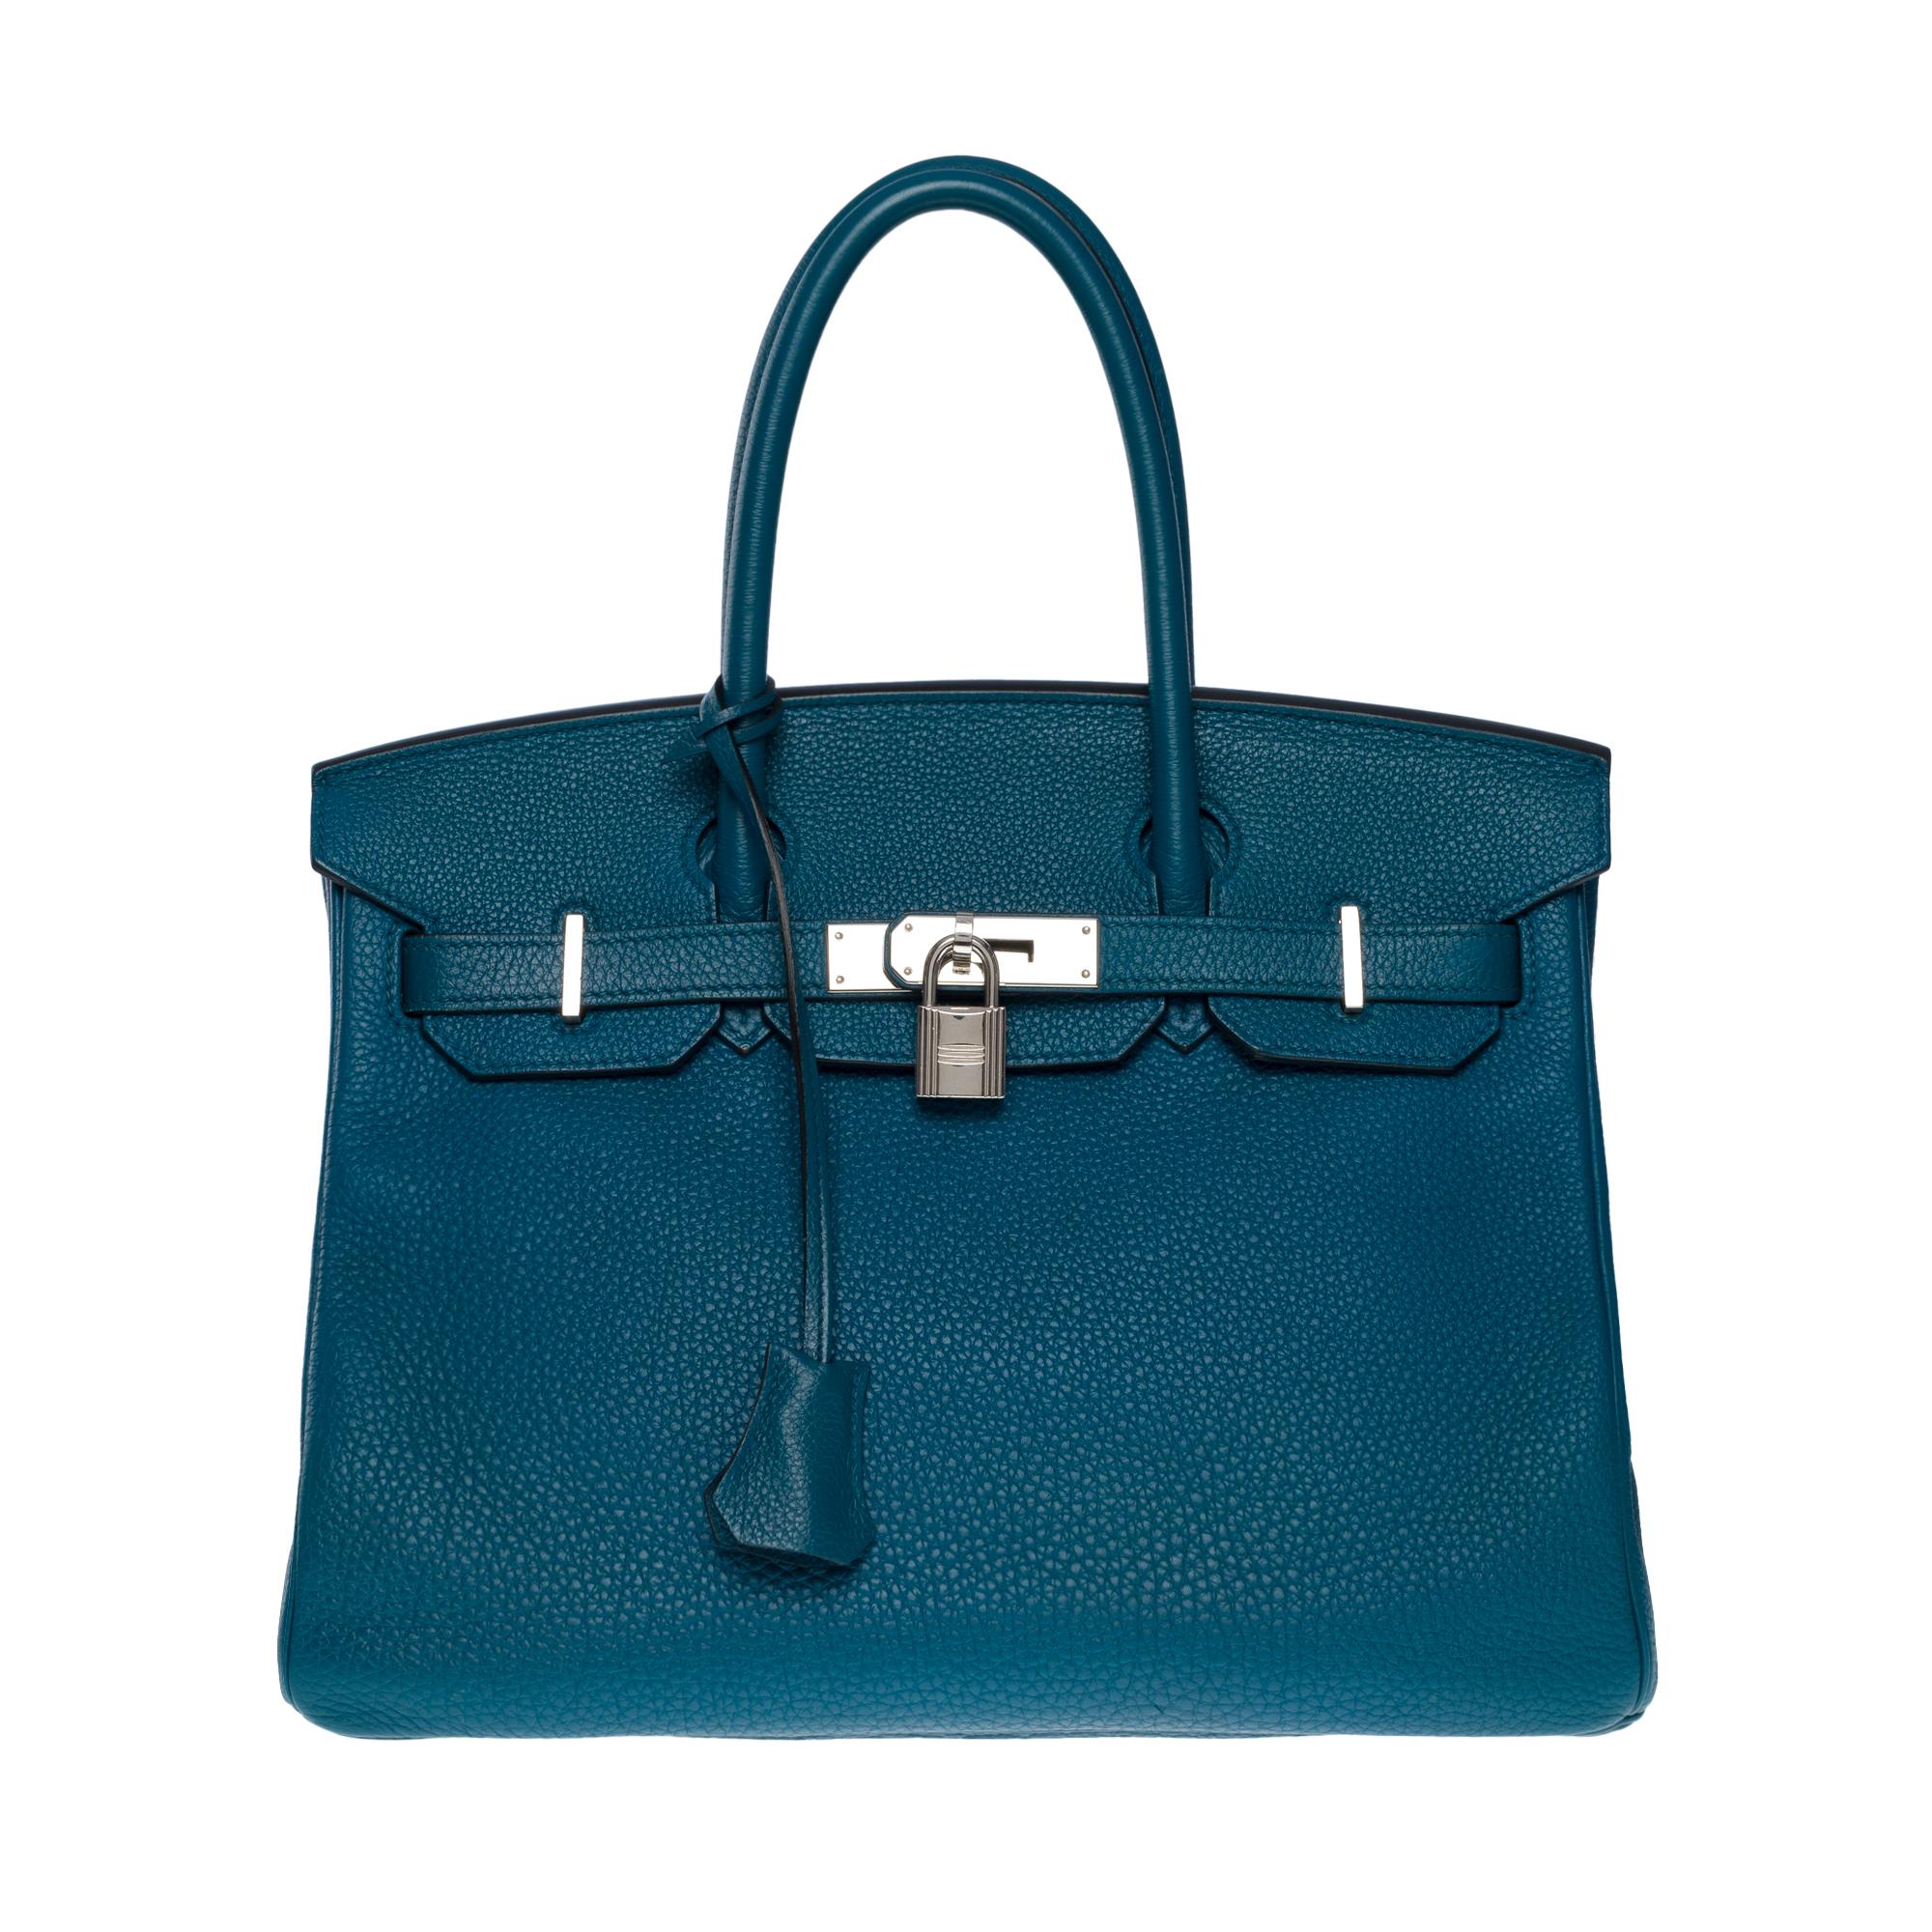 Exceptional & Rare Hermes Birkin 30 handbag in Blue Colvert Togo leather, palladium silver metal hardware, double blue leather handle allowing a hand carry

Flap closure
Inner lining in blue leather, one zippered pocket, one patch pocket
Signature: